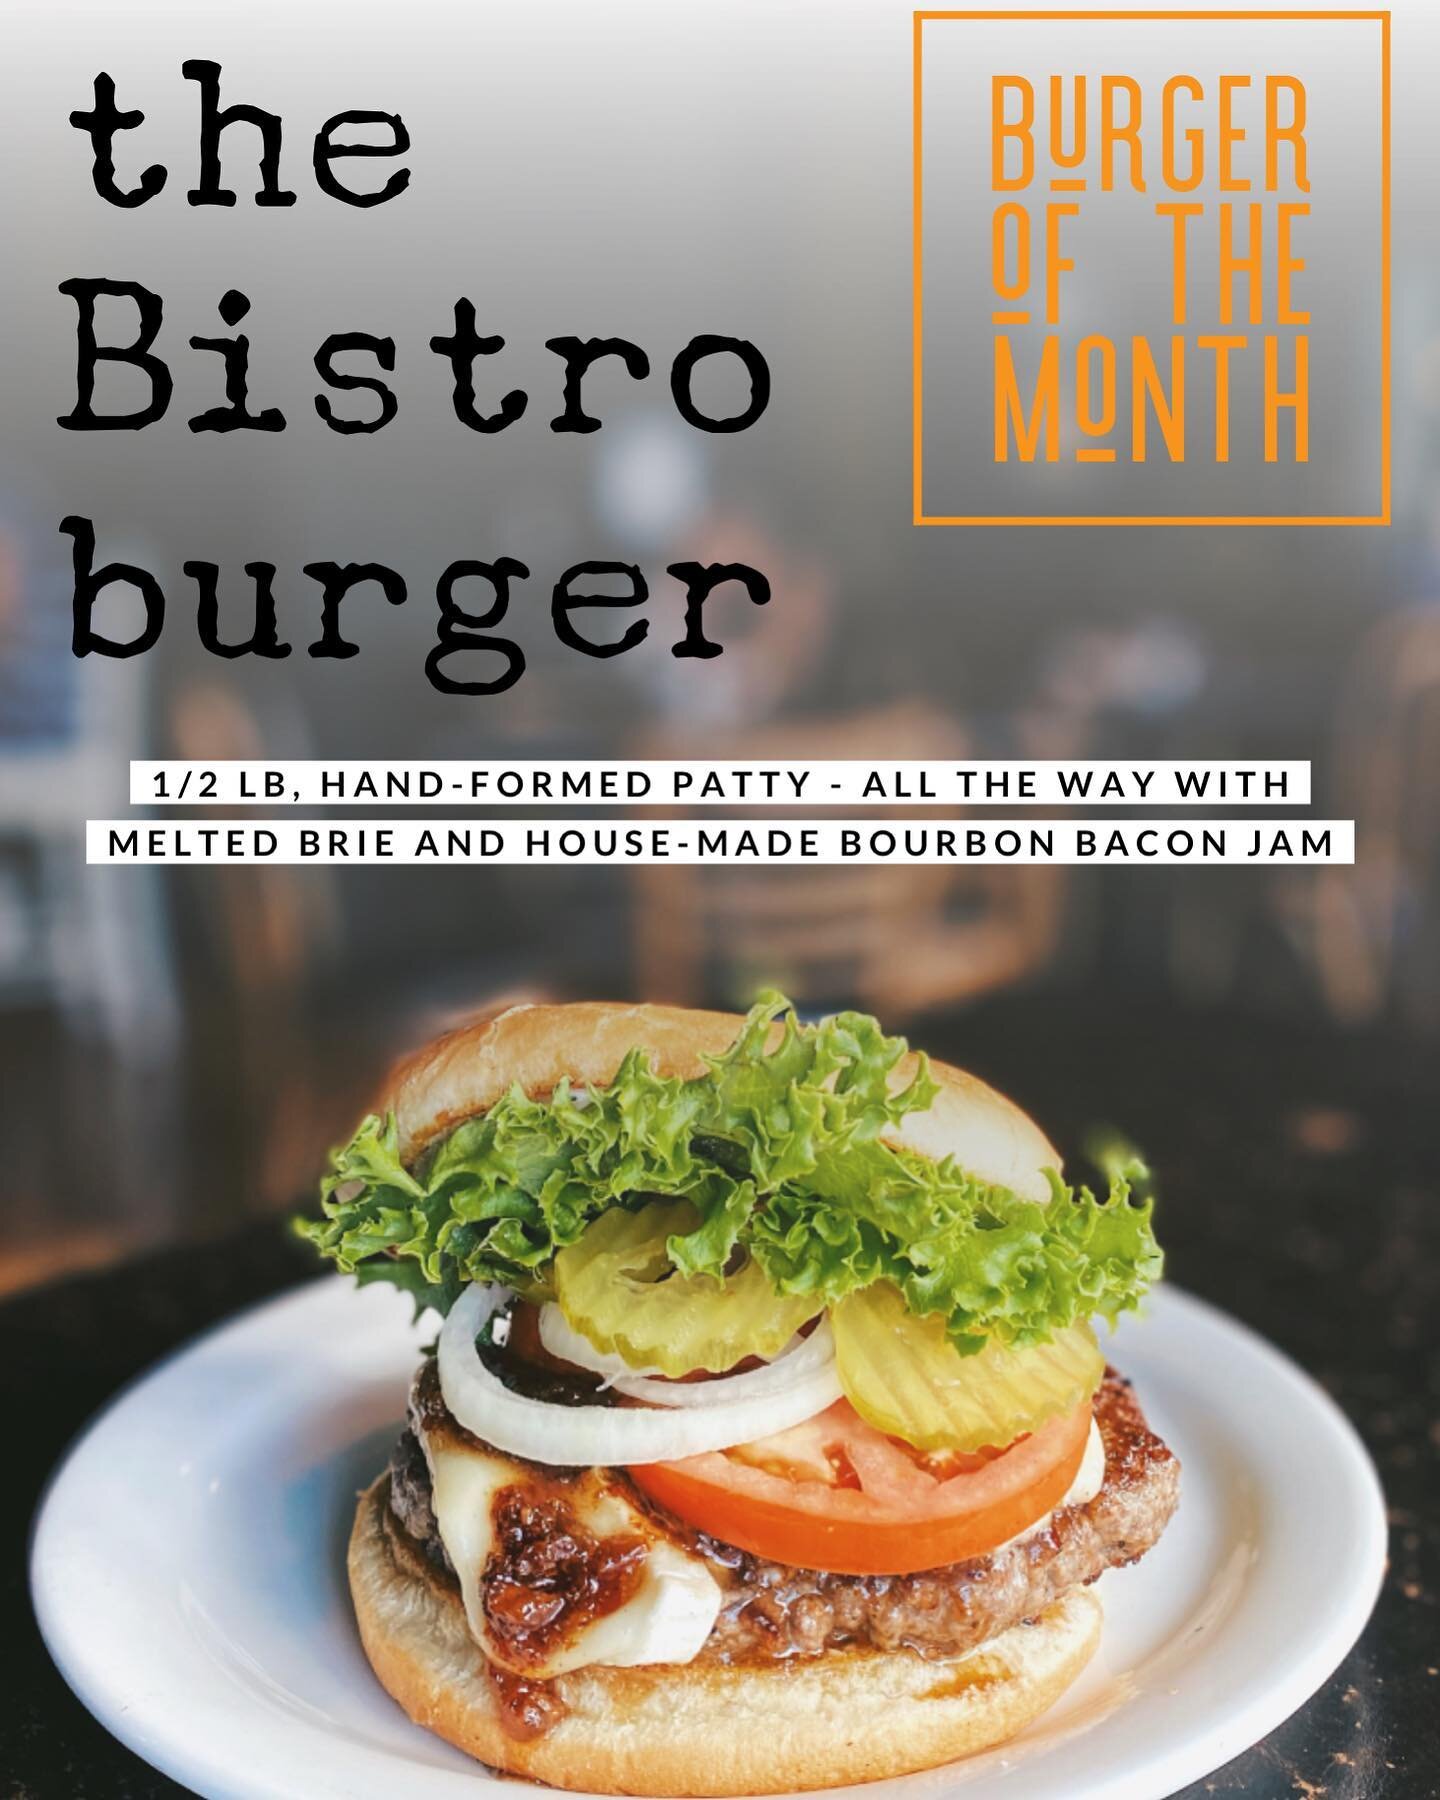 🚨 August Burger of the Month 🚨

🇫🇷The Bistro Burger features melted Brie and a house-made bourbon bacon jam 🤤 Served all the way with lettuce, tomato, pickles, onions, and mayo. Served with a side of your choice!